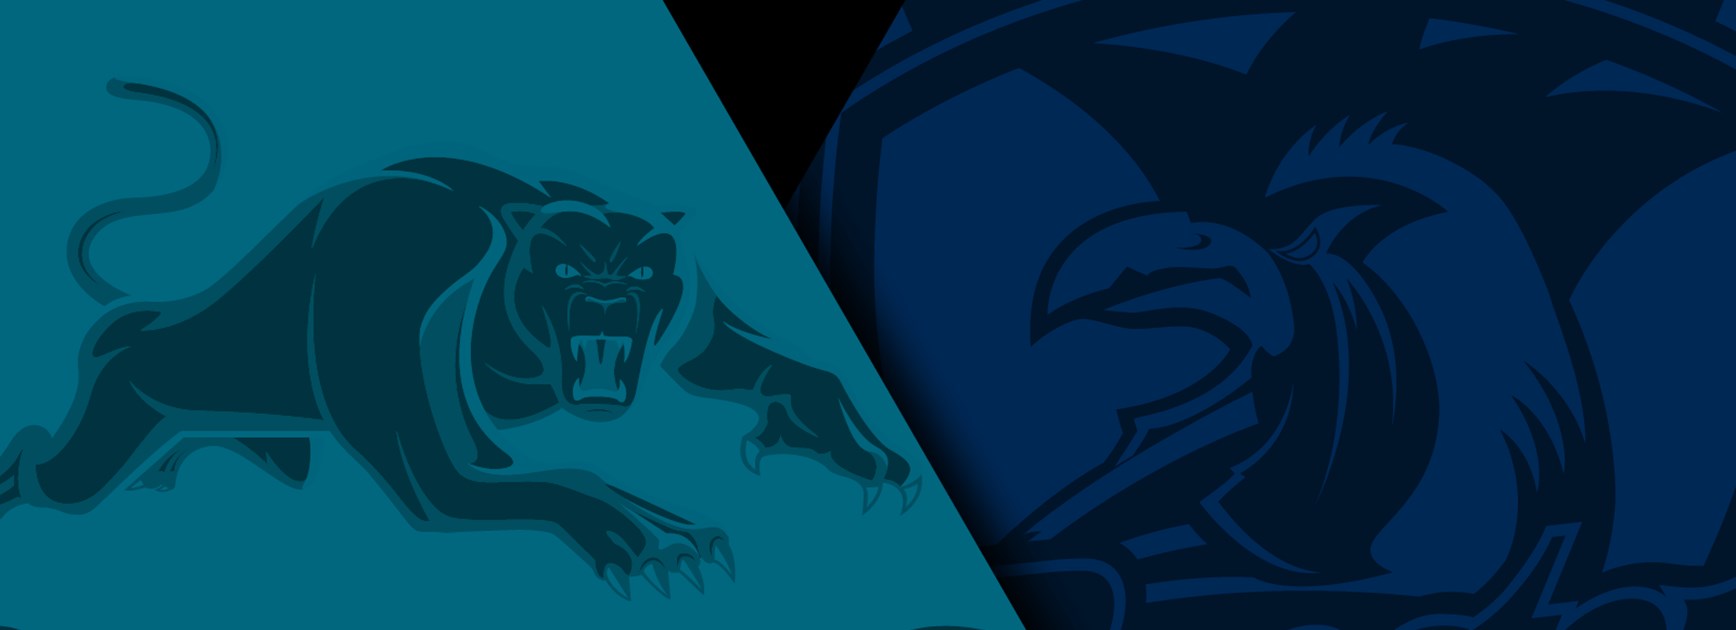 Will the Panthers beat the Roosters in Round 22?